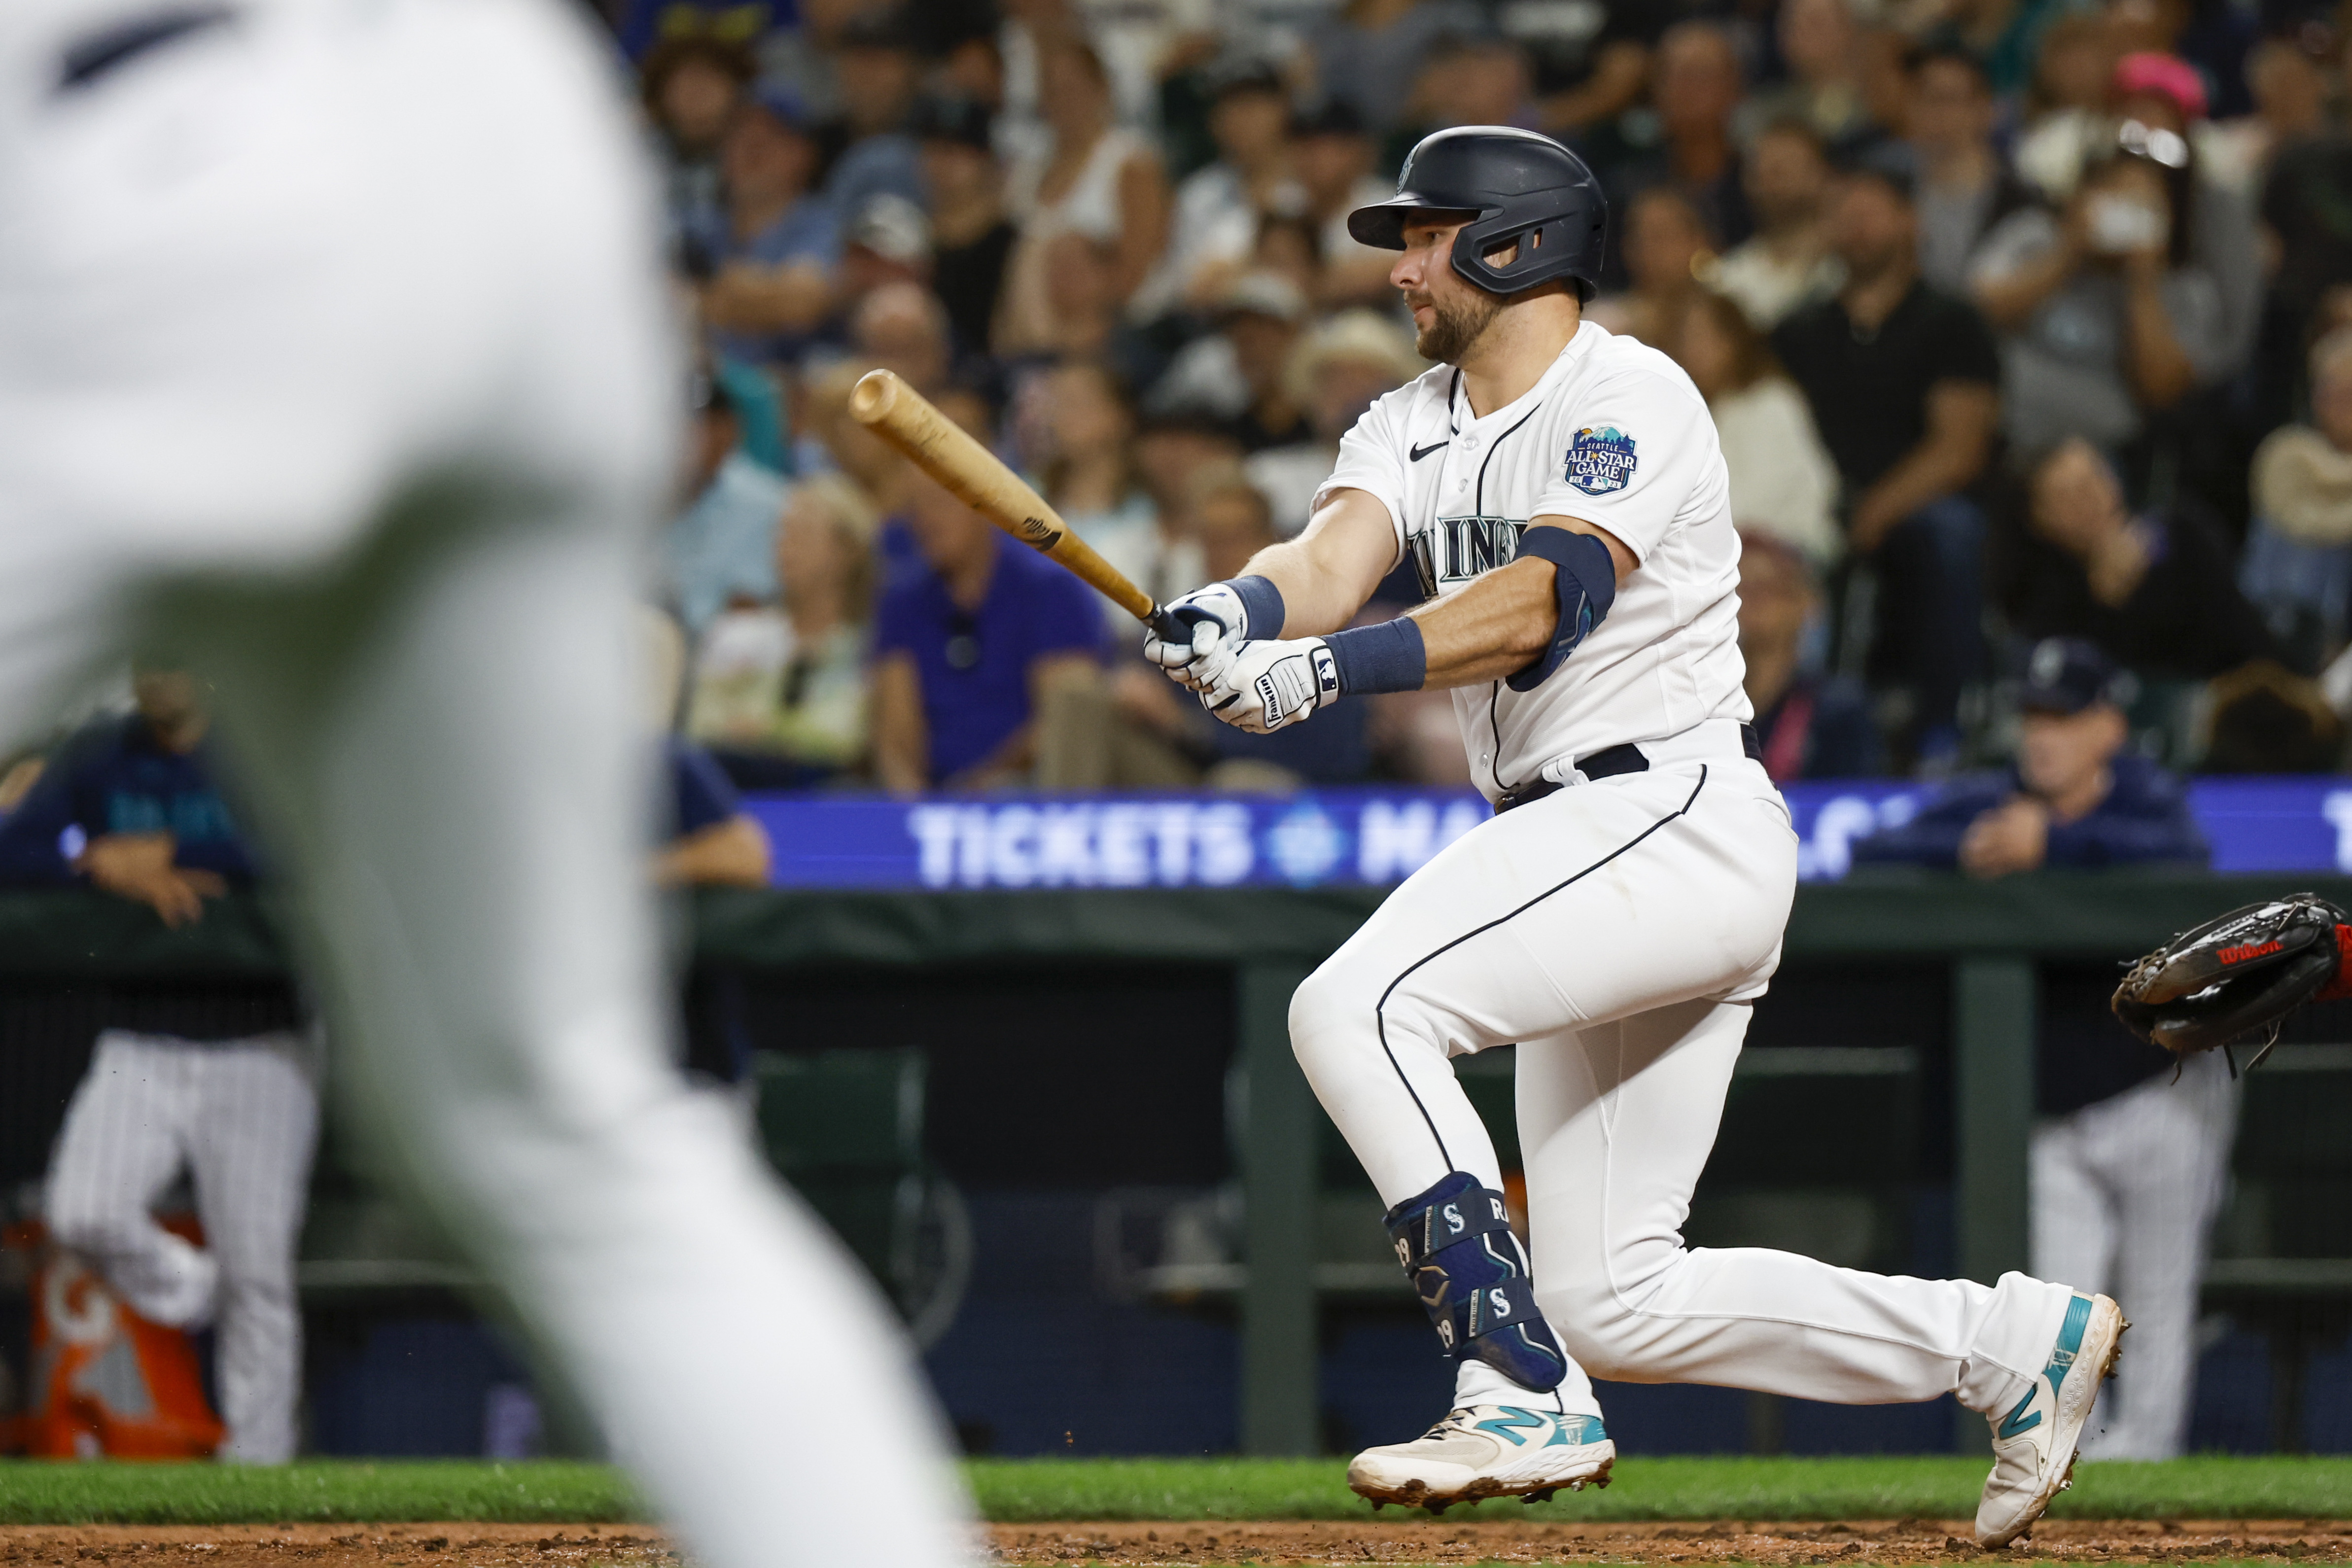 Cal Raleigh's two homers propel Mariners past Red Sox